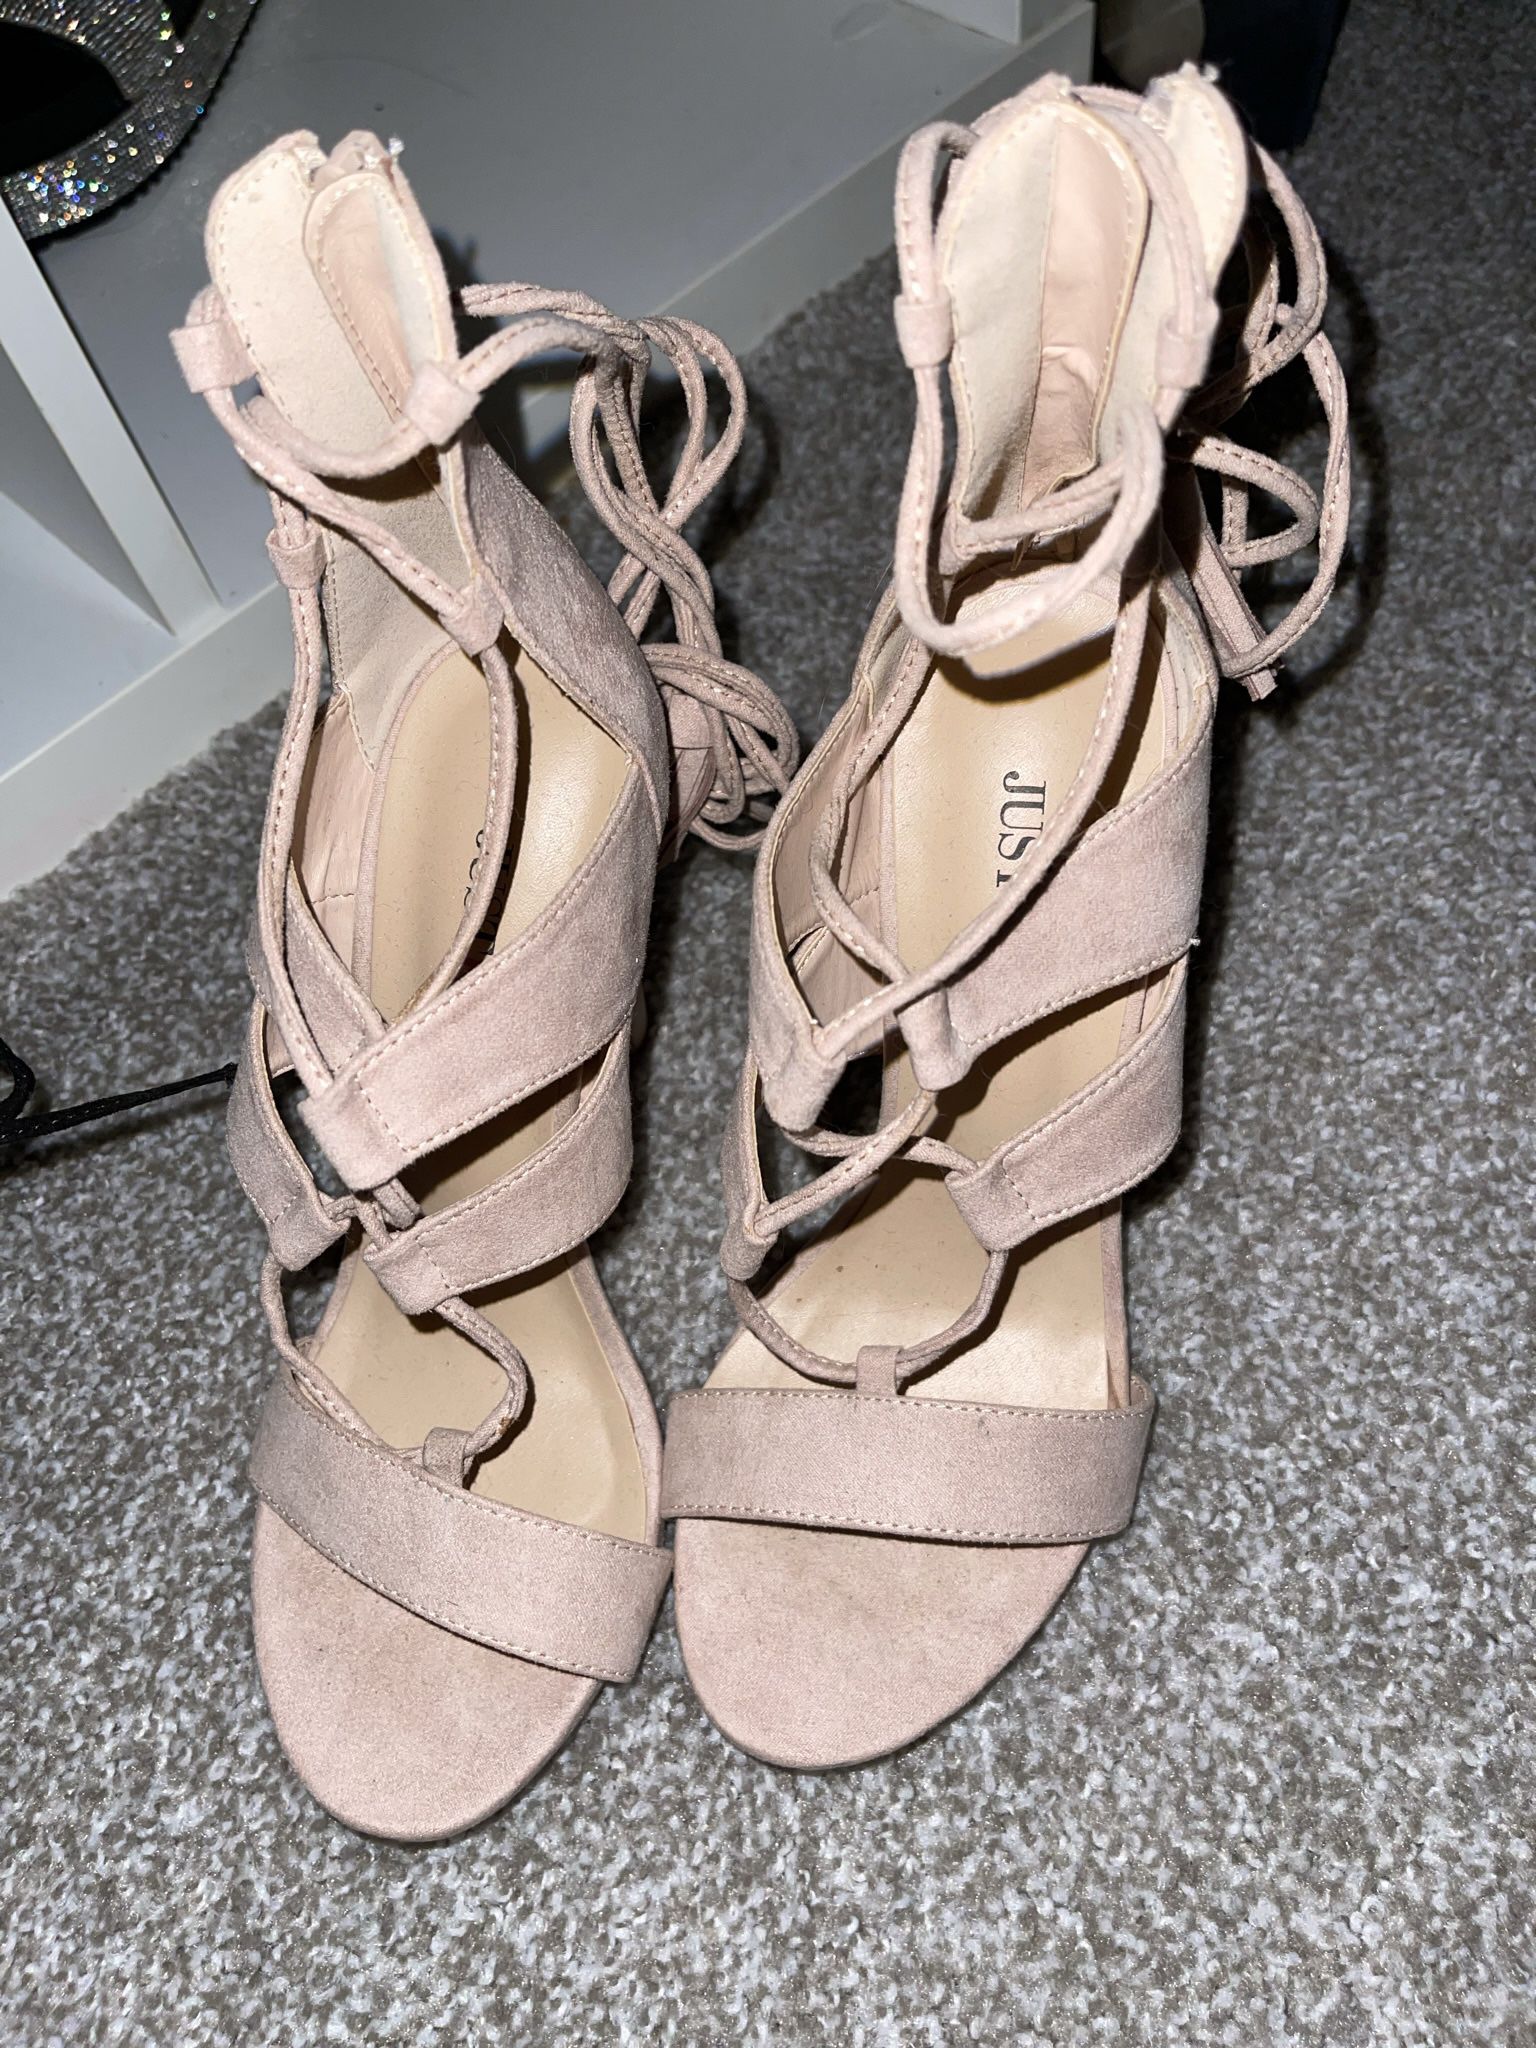 Blush Colored Strappy Heels